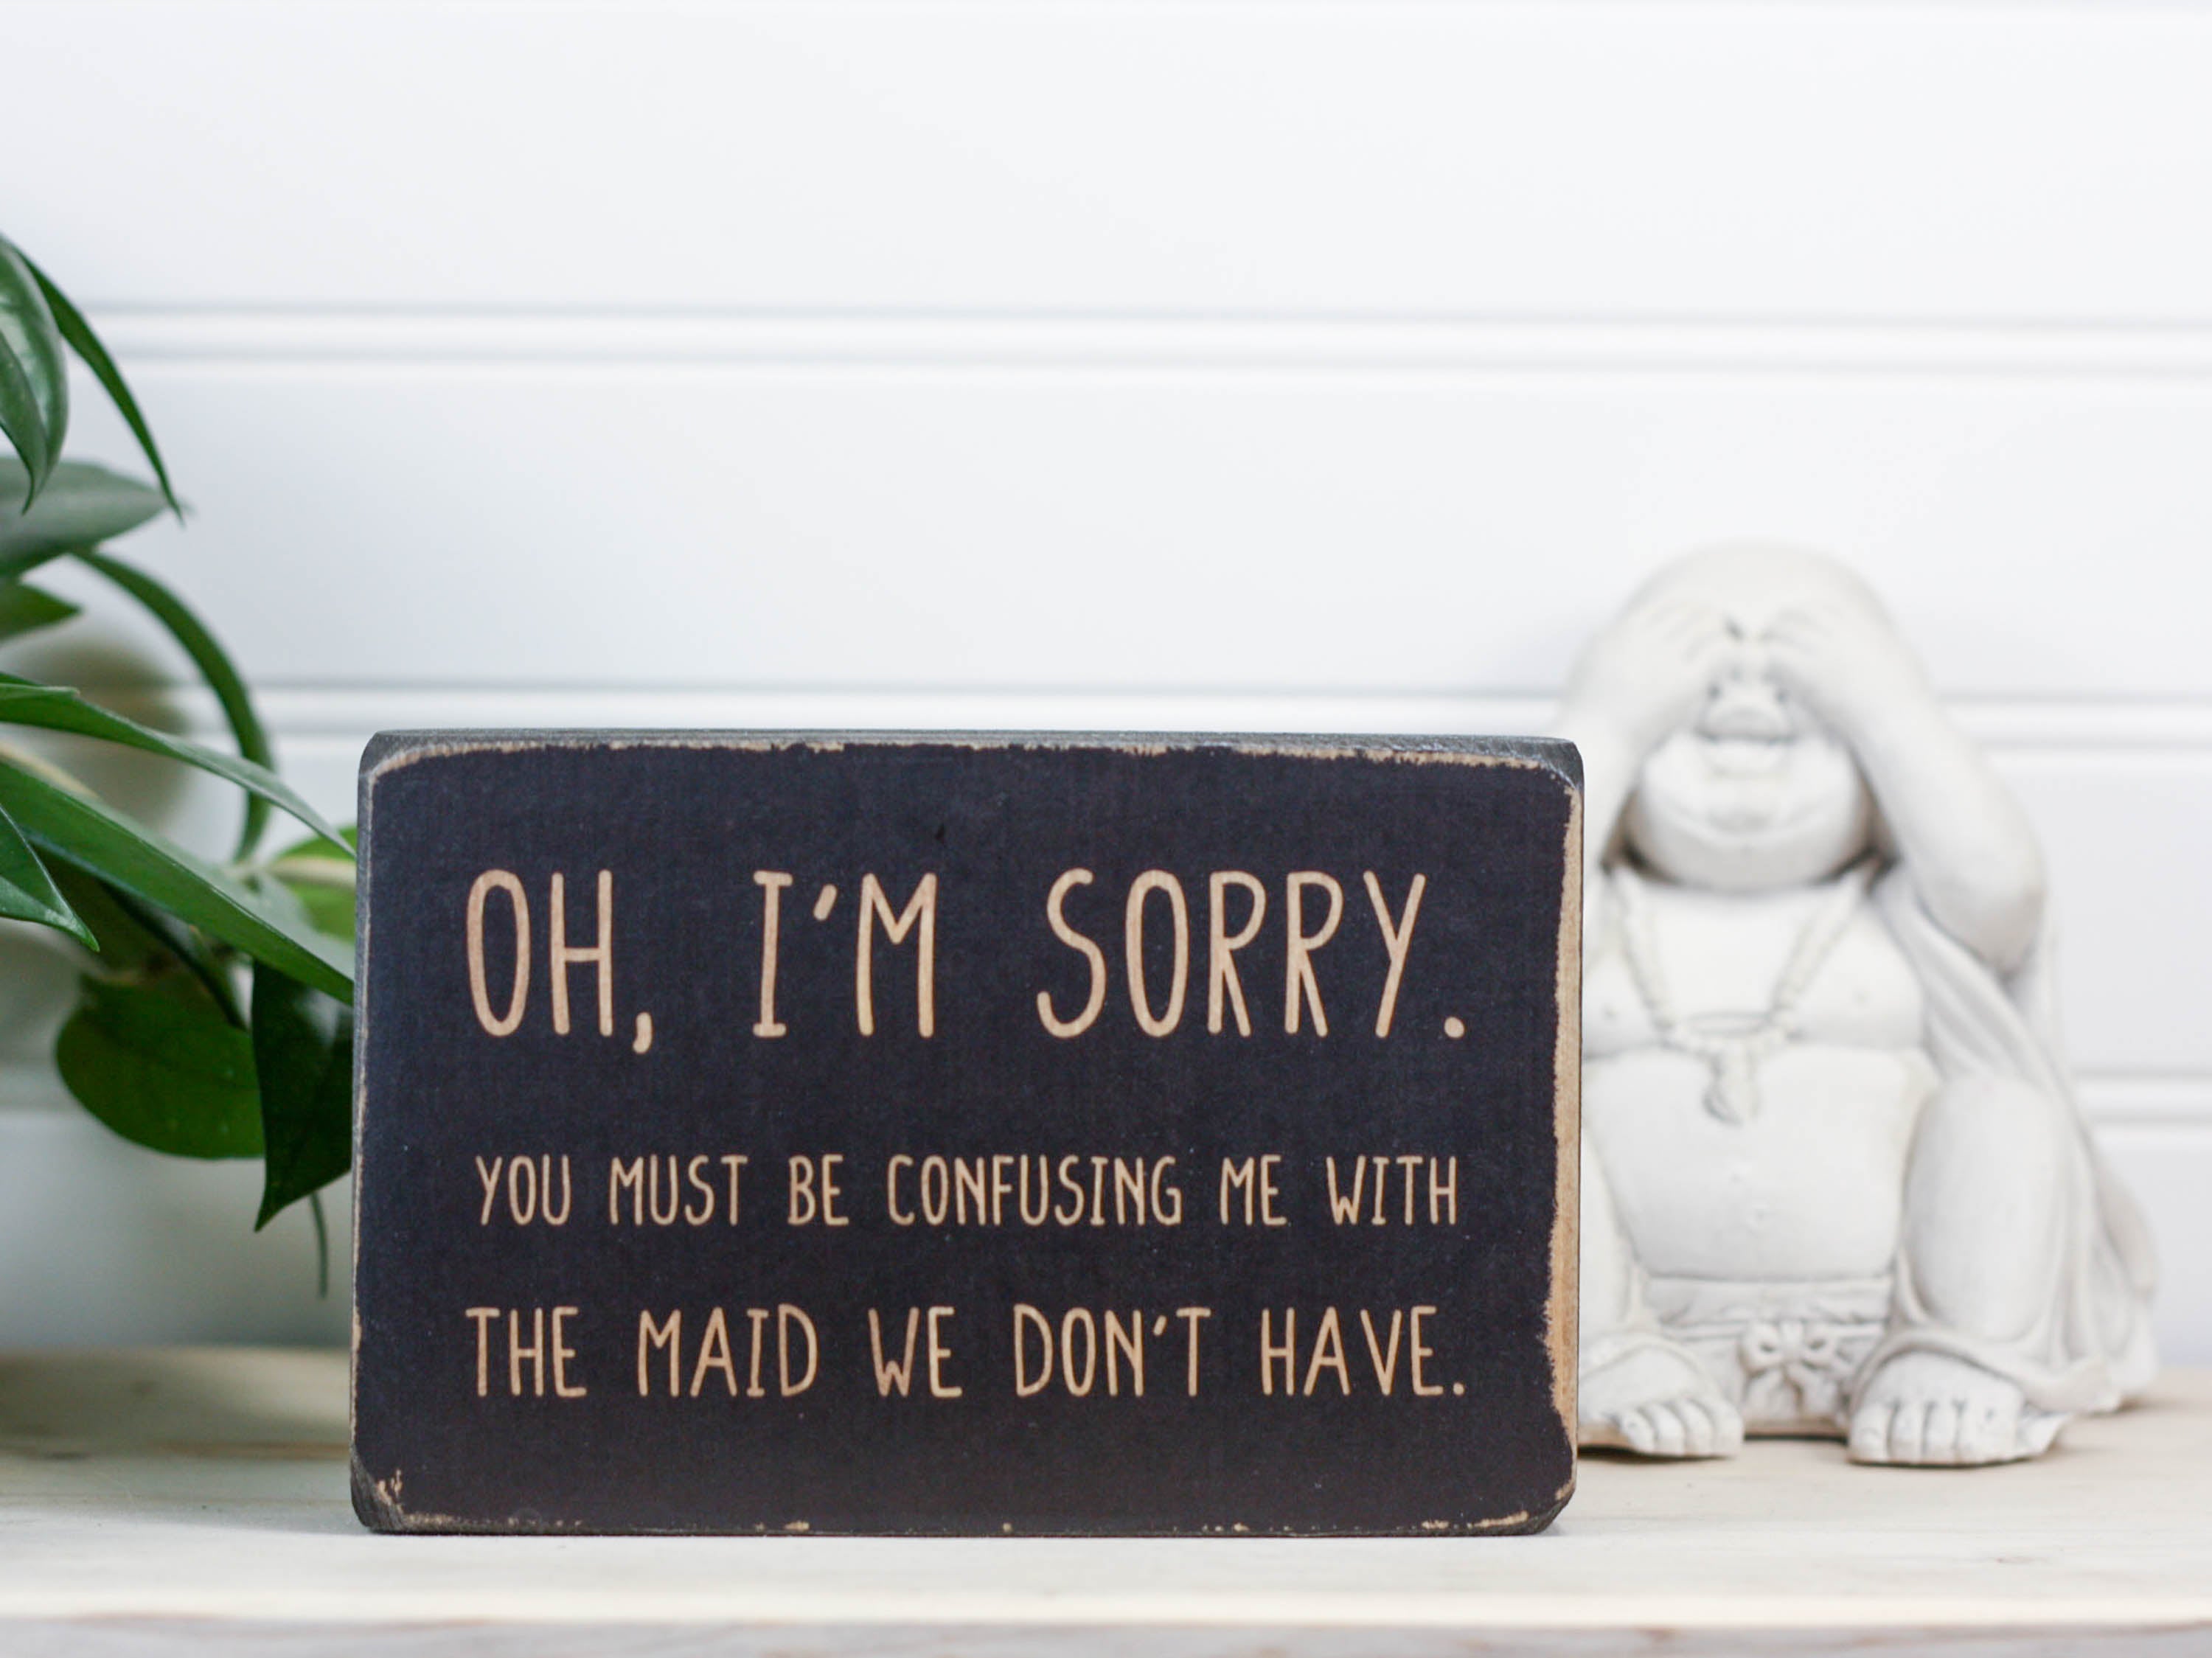 Small wood decor sign in distressed black with the saying "Oh, I'm sorry. You must be confusing me with the maid we don't have."